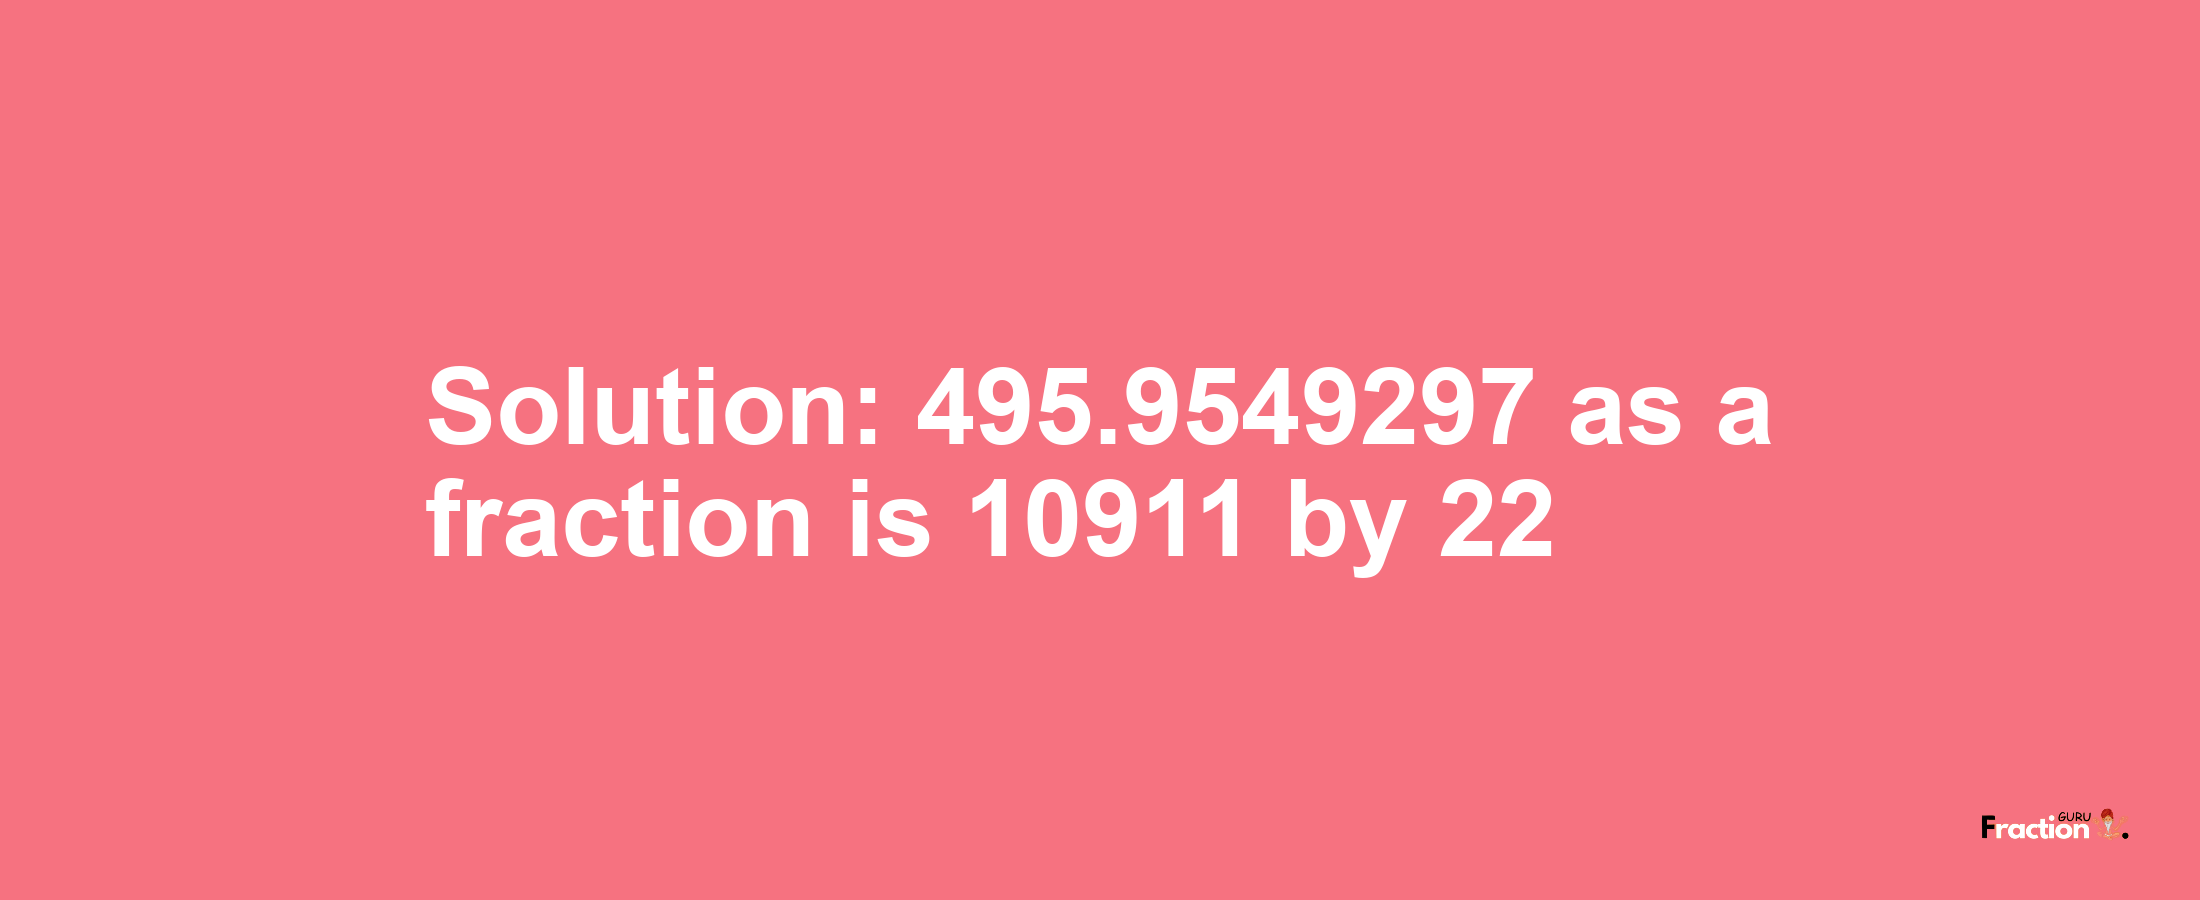 Solution:495.9549297 as a fraction is 10911/22